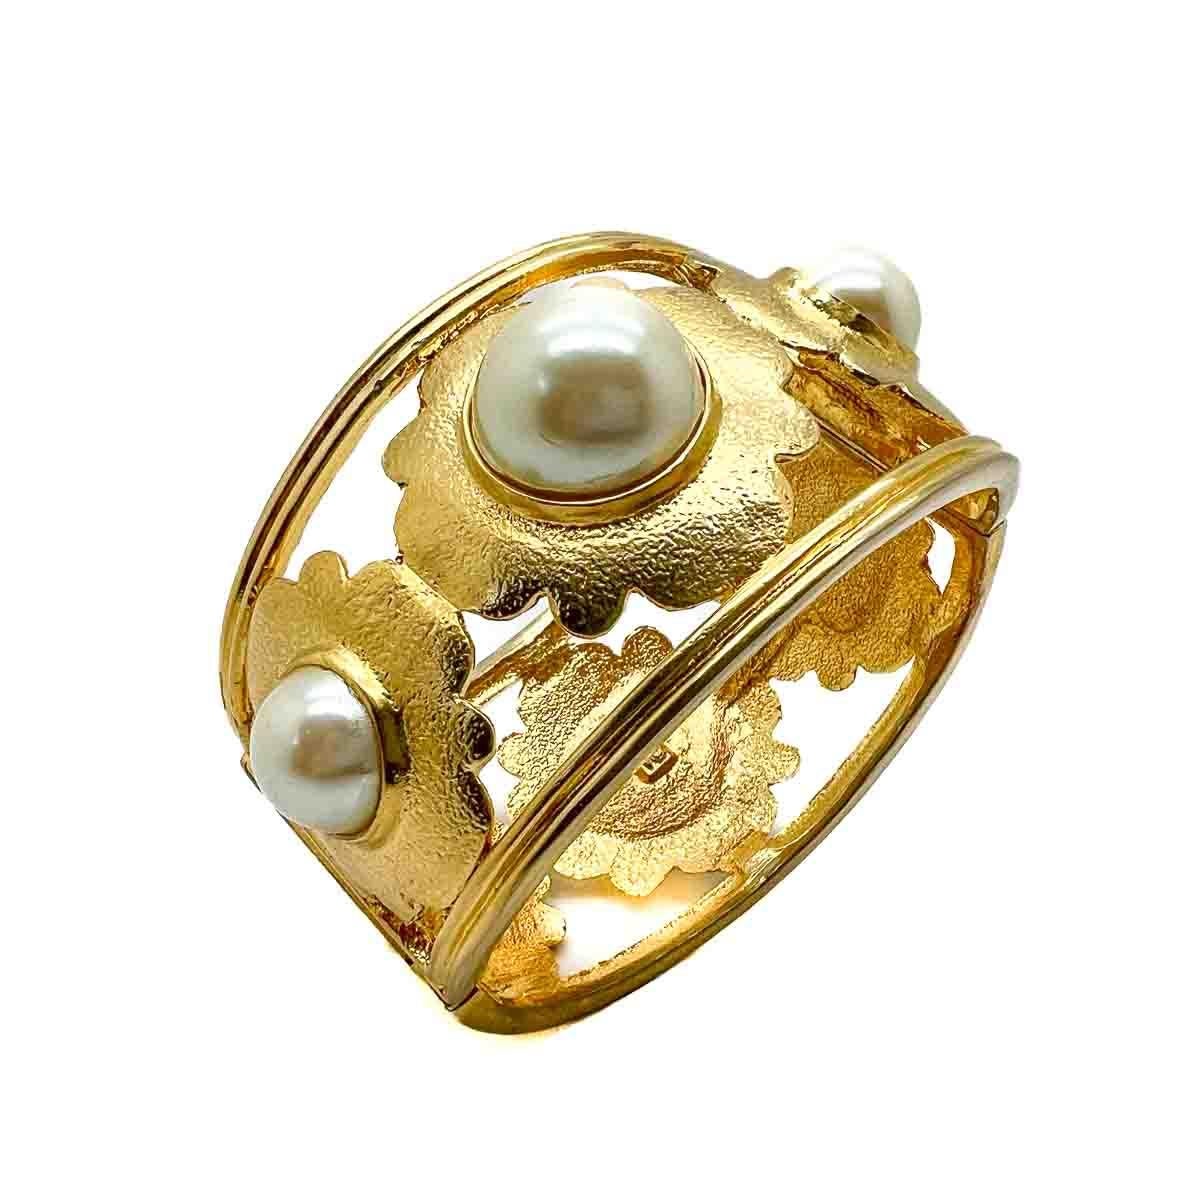 A Vintage Pearl Floral Motif Cuff. Reminiscent of the Chanel designs of the time, this bold cuff flaunts it elegantly timeless combination of rich gold and lustrous pearl to perfection. A timeless classic that will undoubtedly up your style